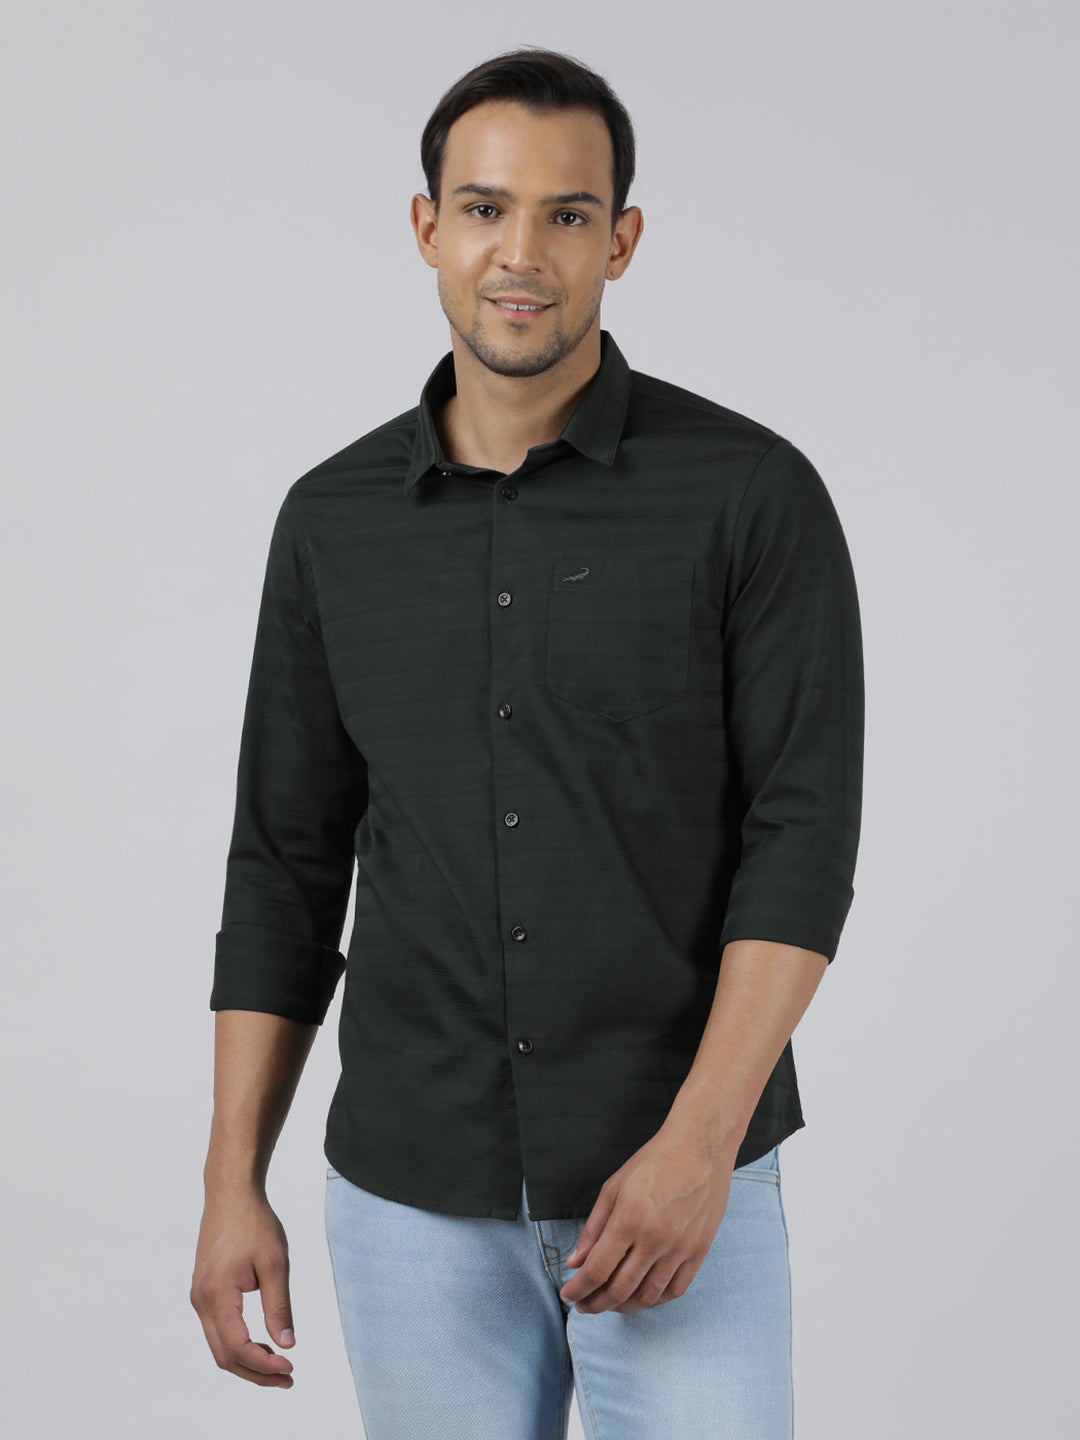 Green Solid Full Sleeve 100% Cotton Shirt